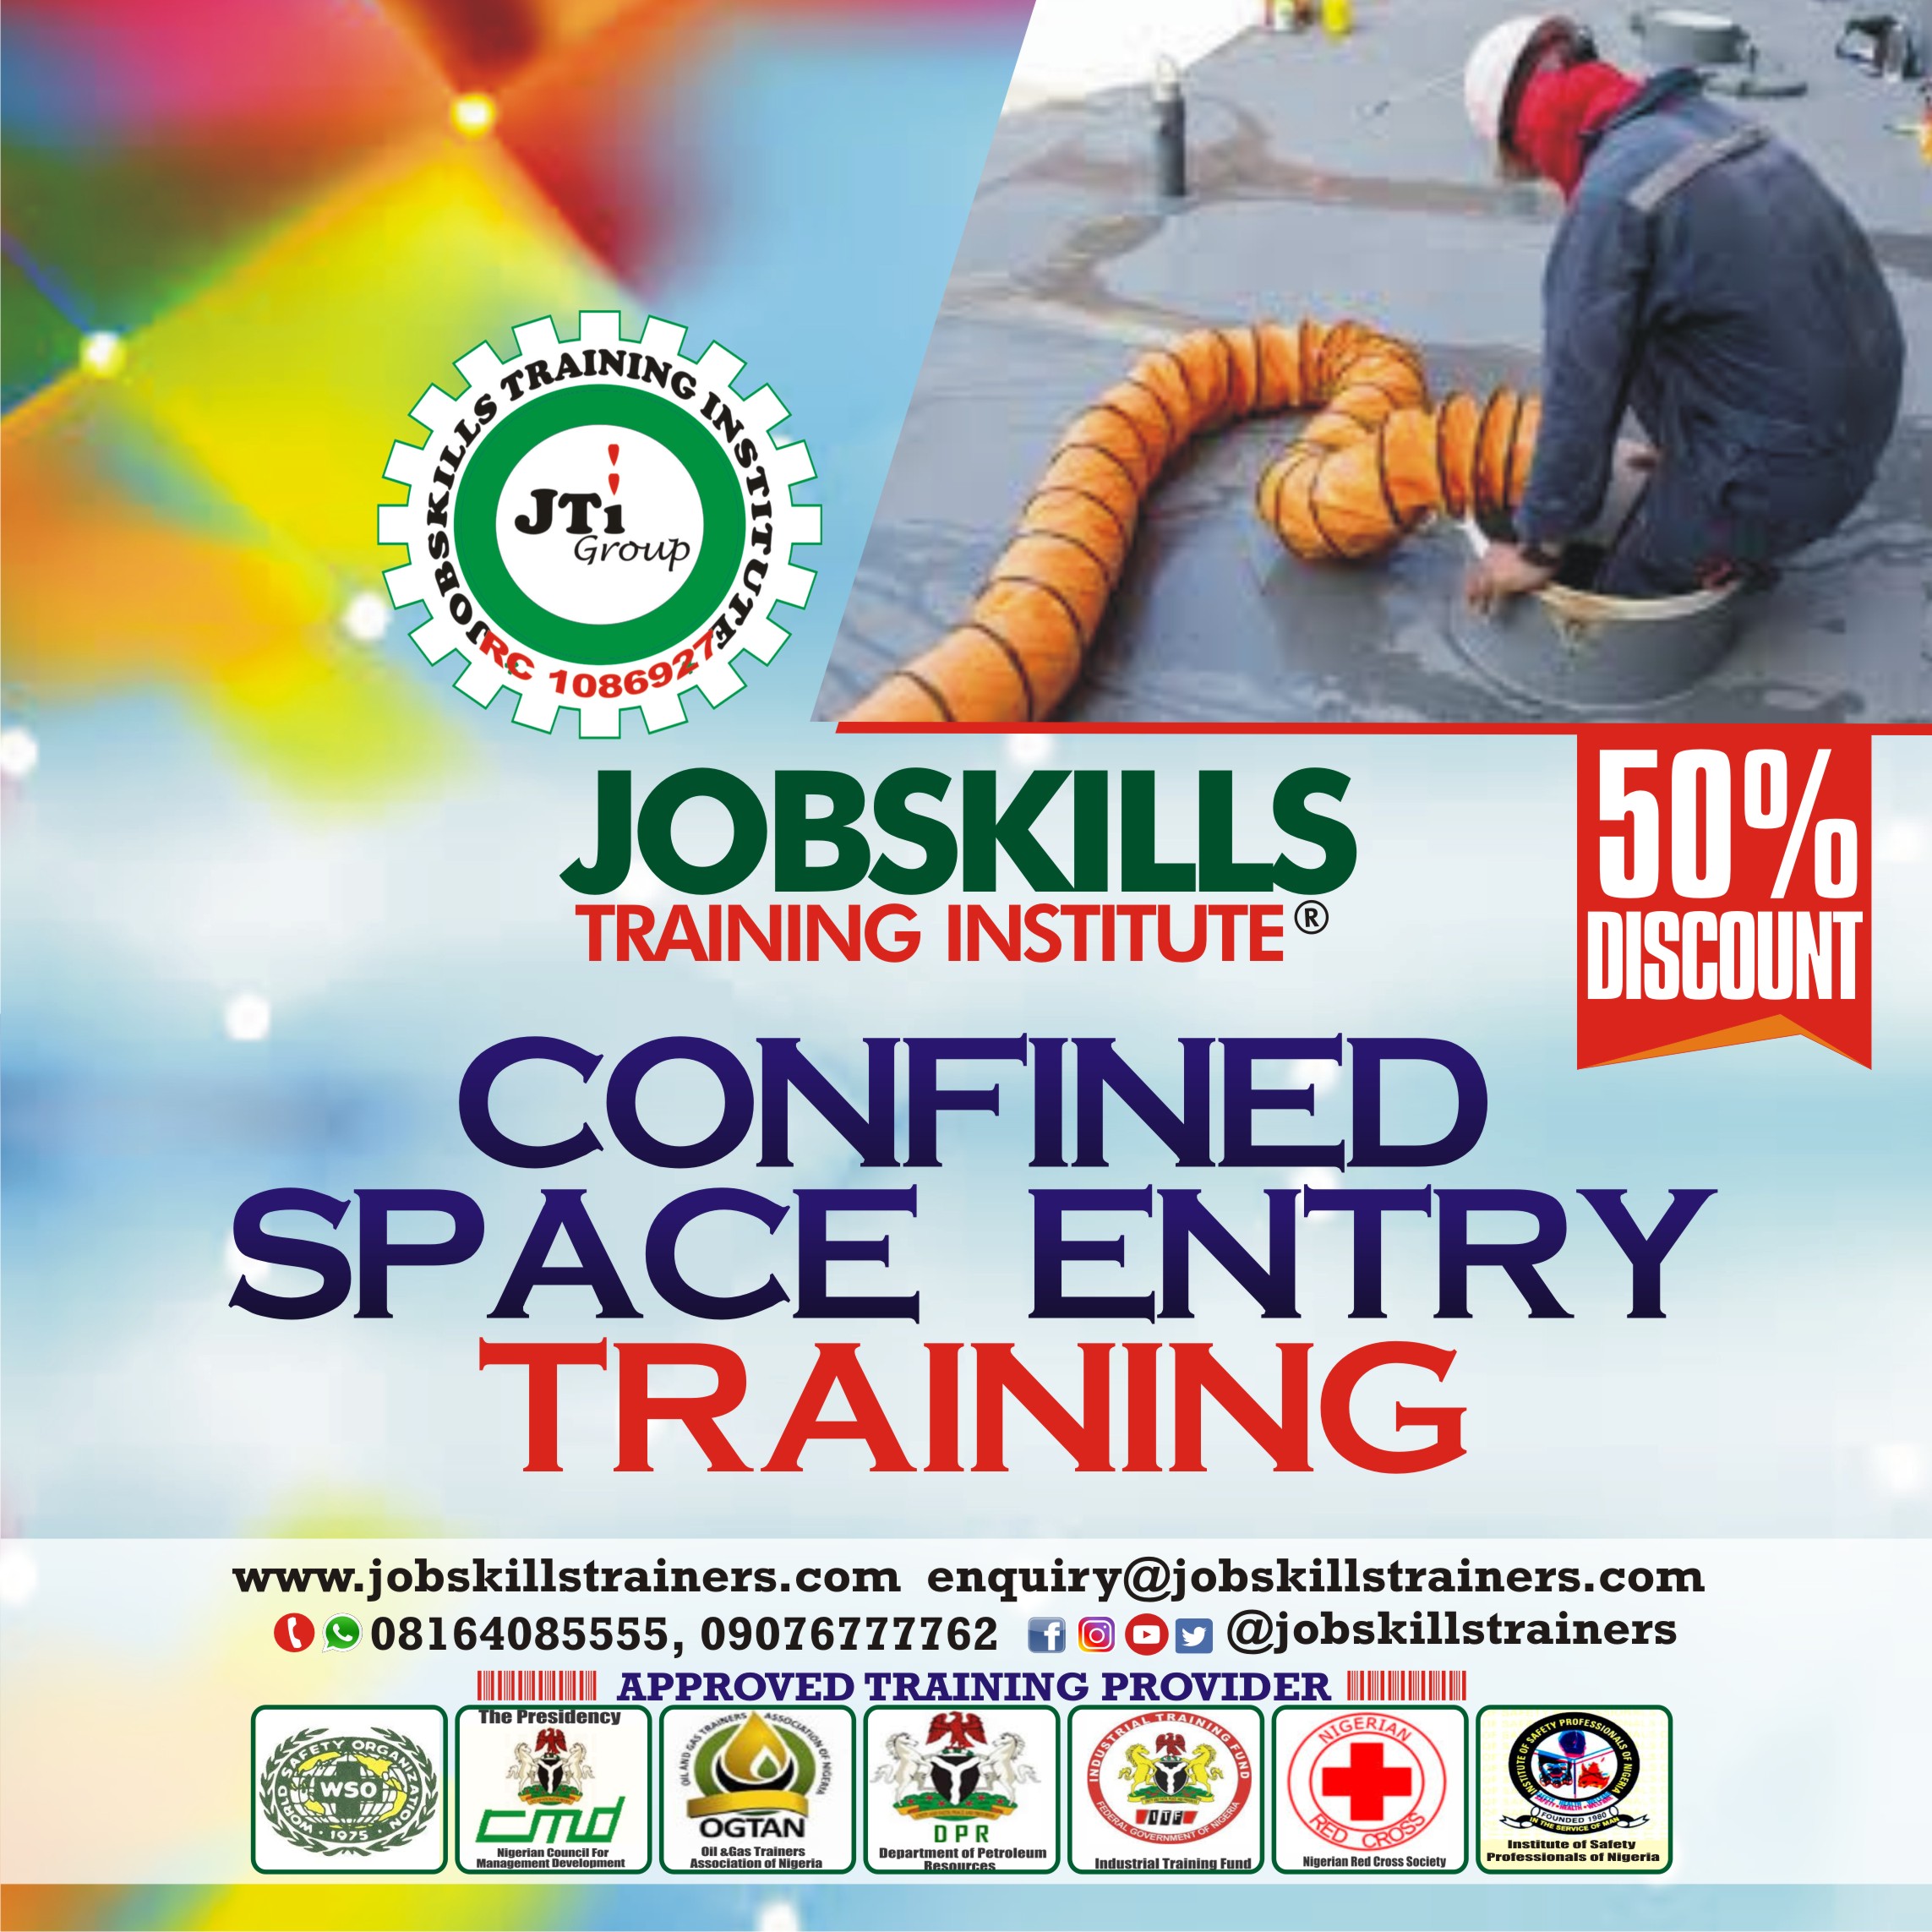 CONFINED SPACE ENTRY TRAINING (CSE)